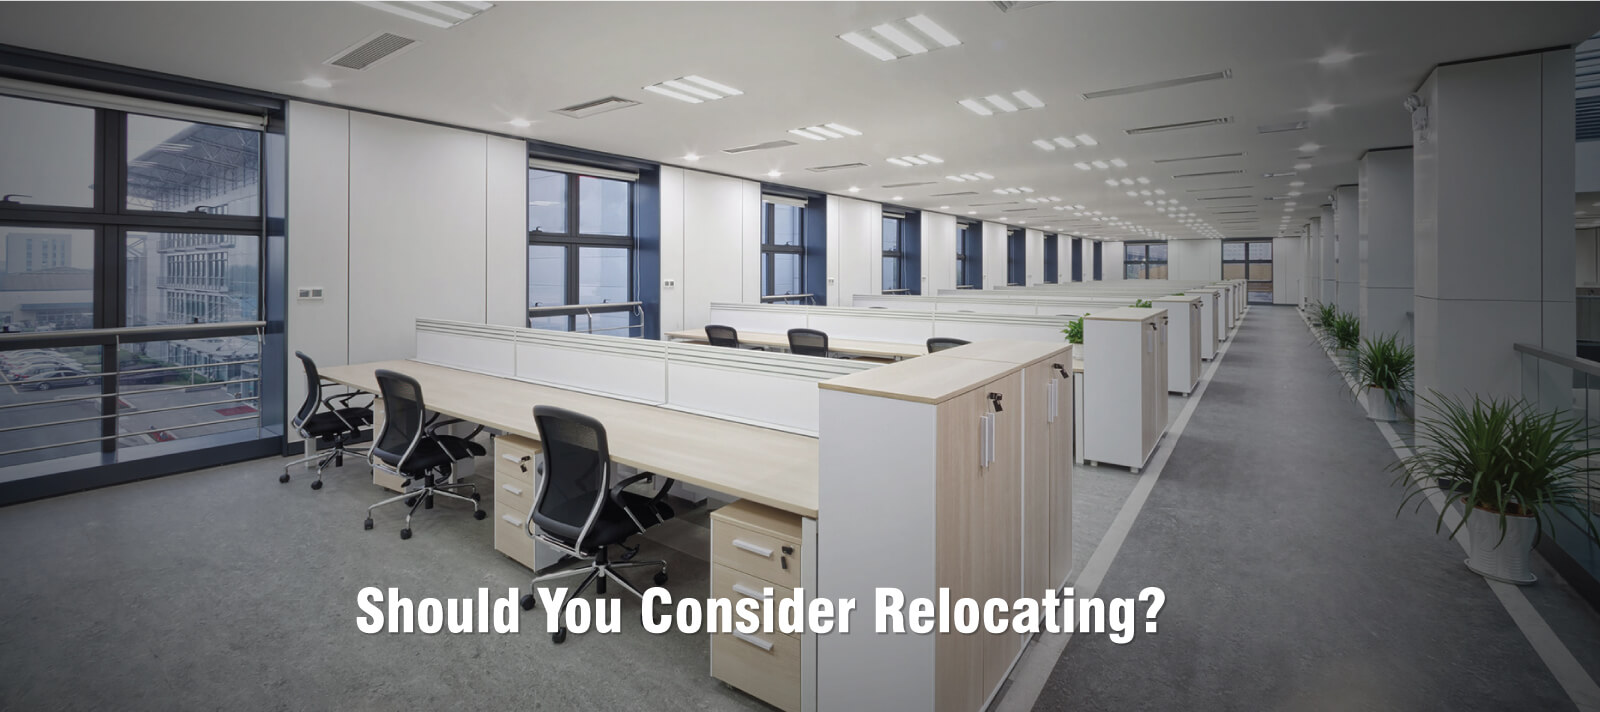 Should You Consider Relocating?